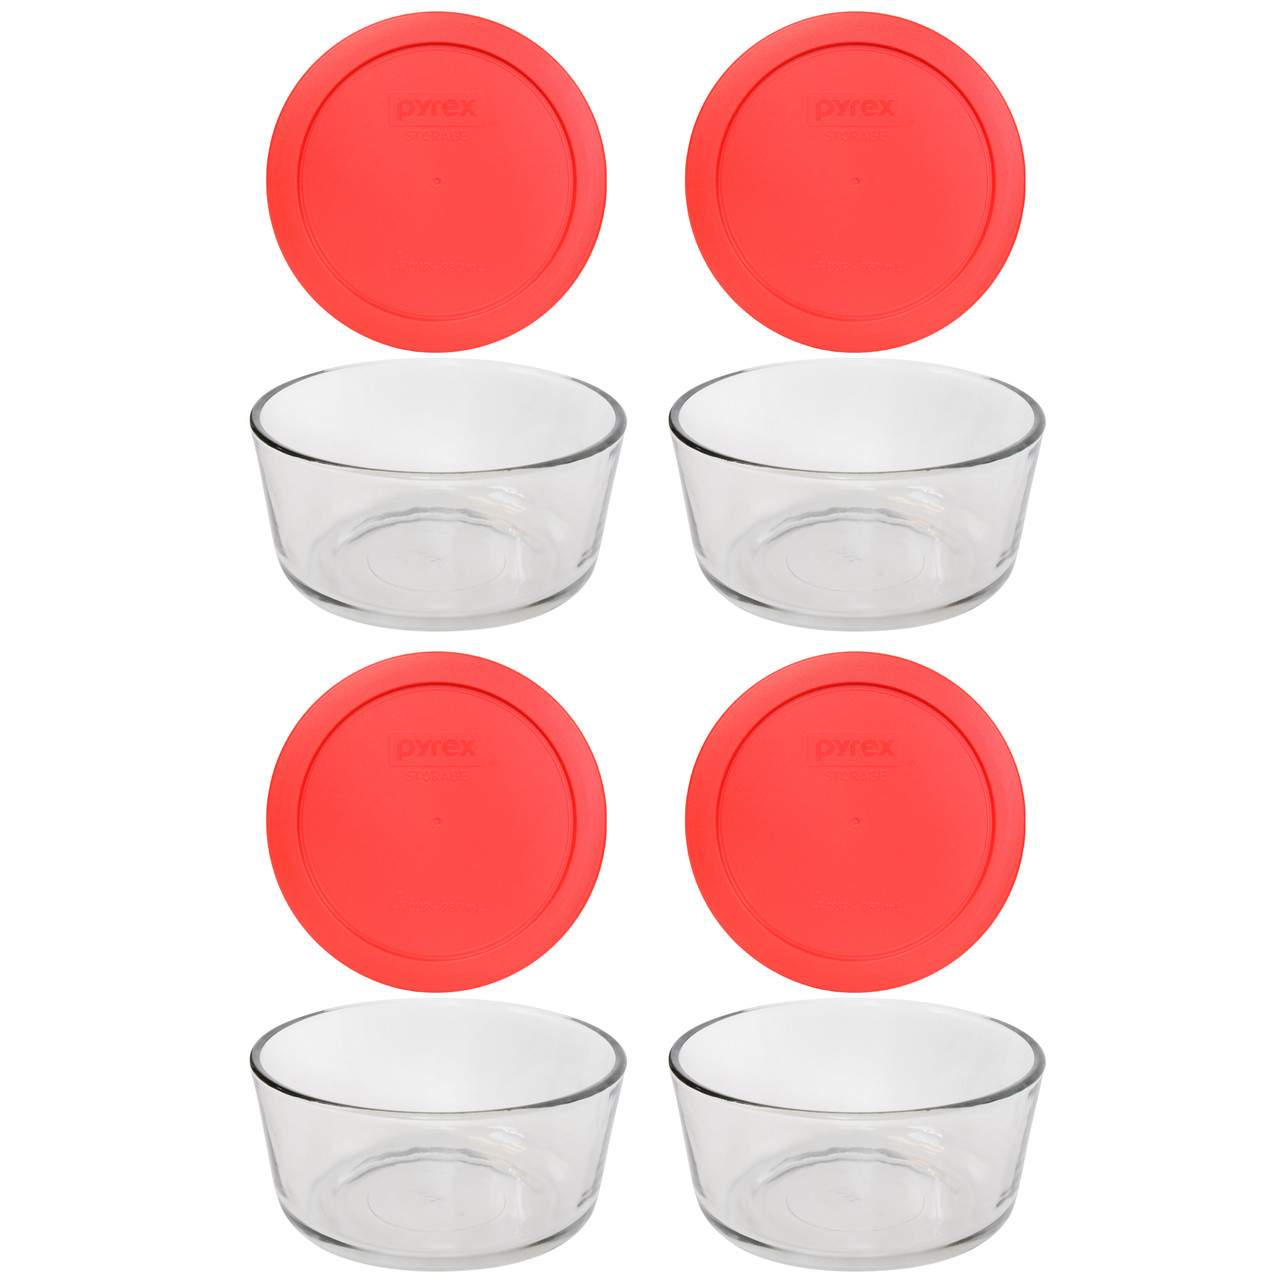 Pyrex 7201 Round 4-Cup Glass Food Storage Bowl and 7201-PC Sangria